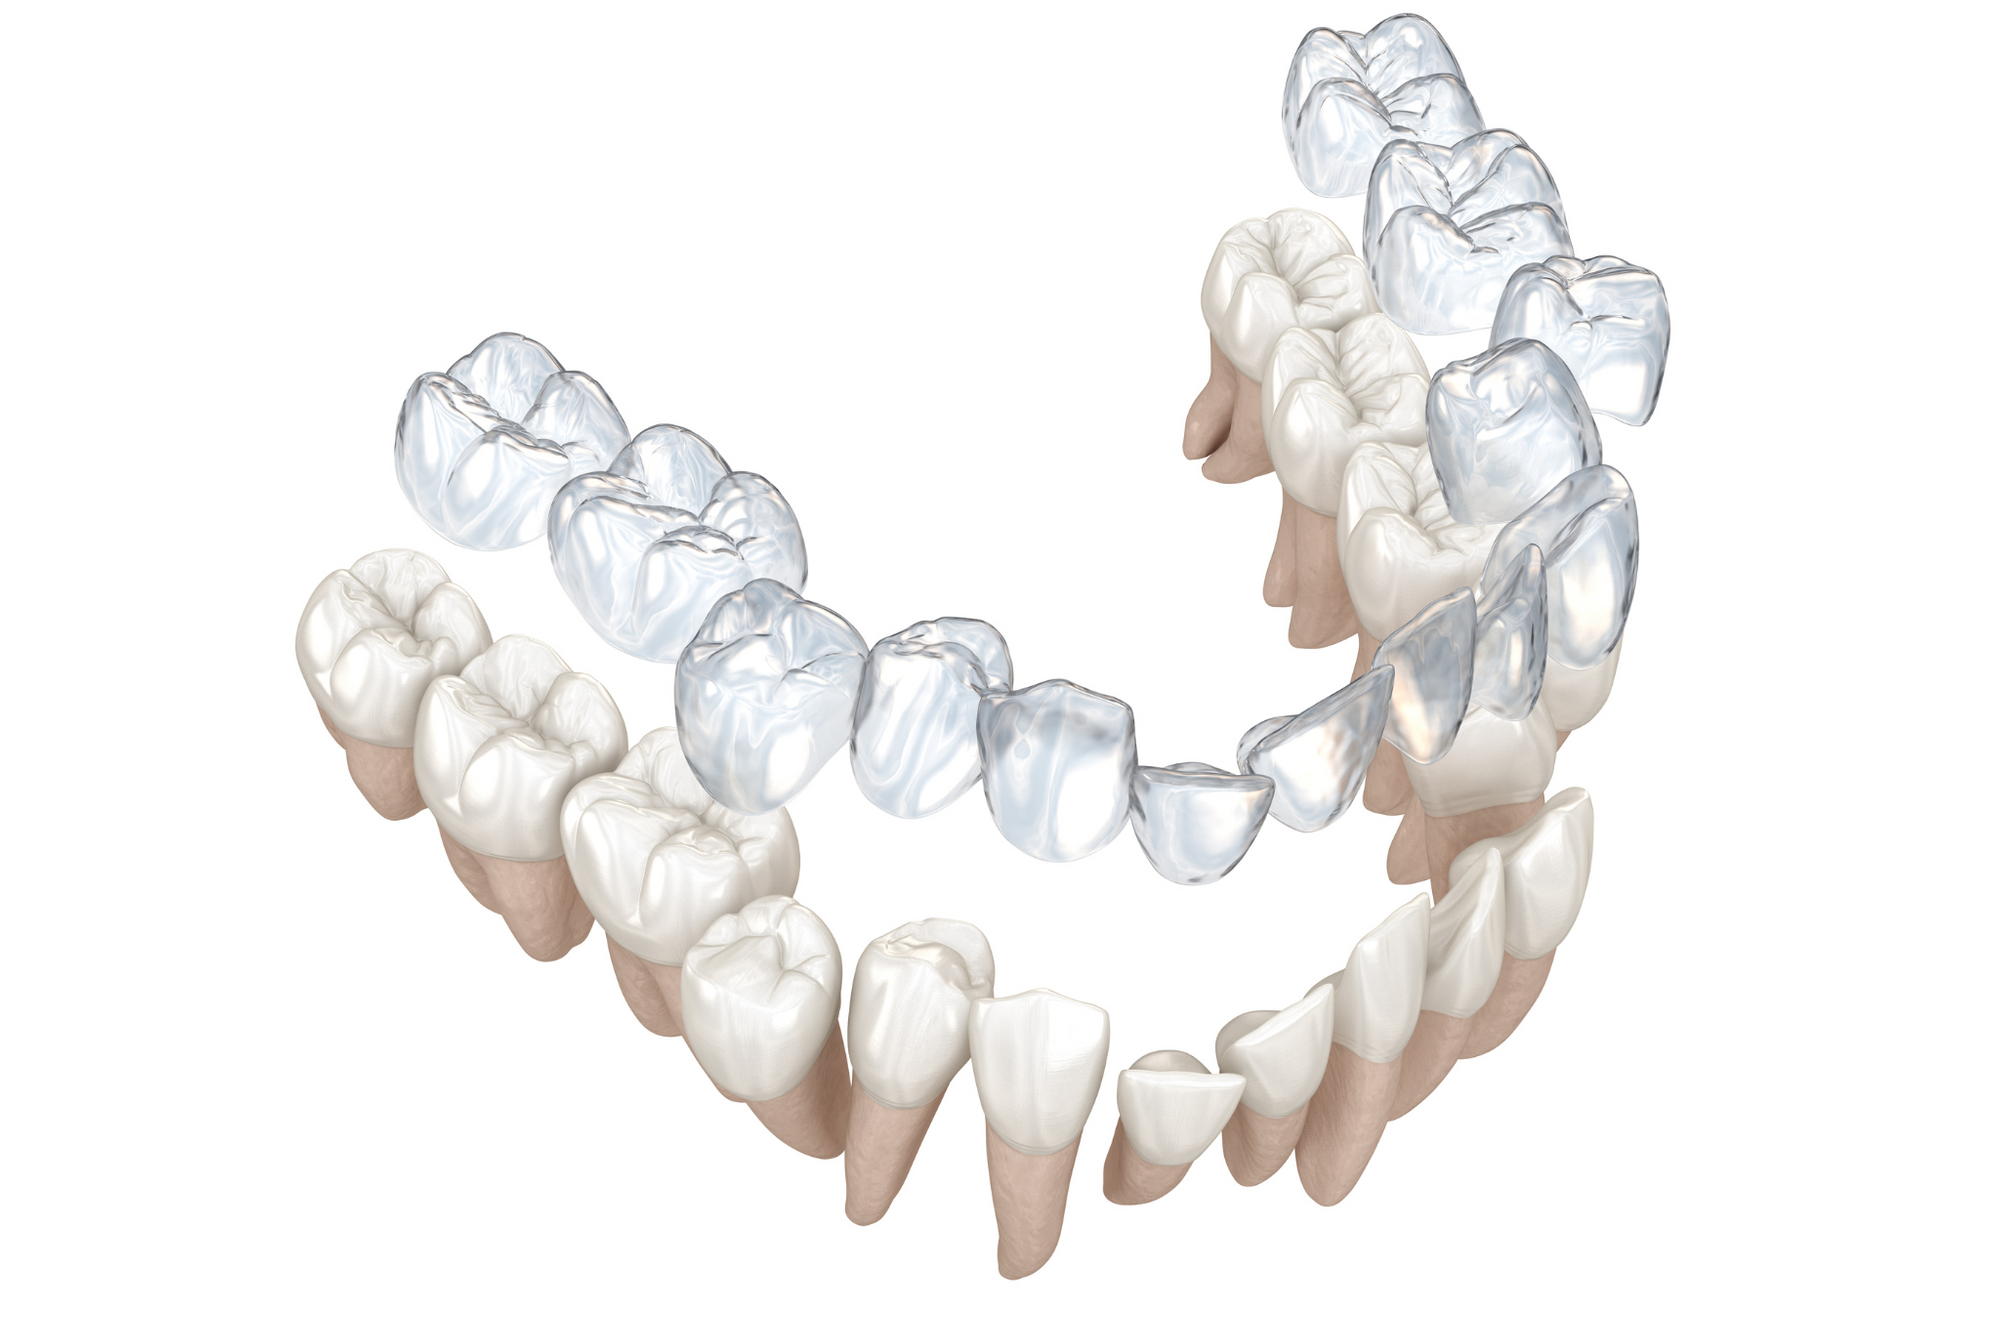 CosmeticDentistry-image2 (3).png